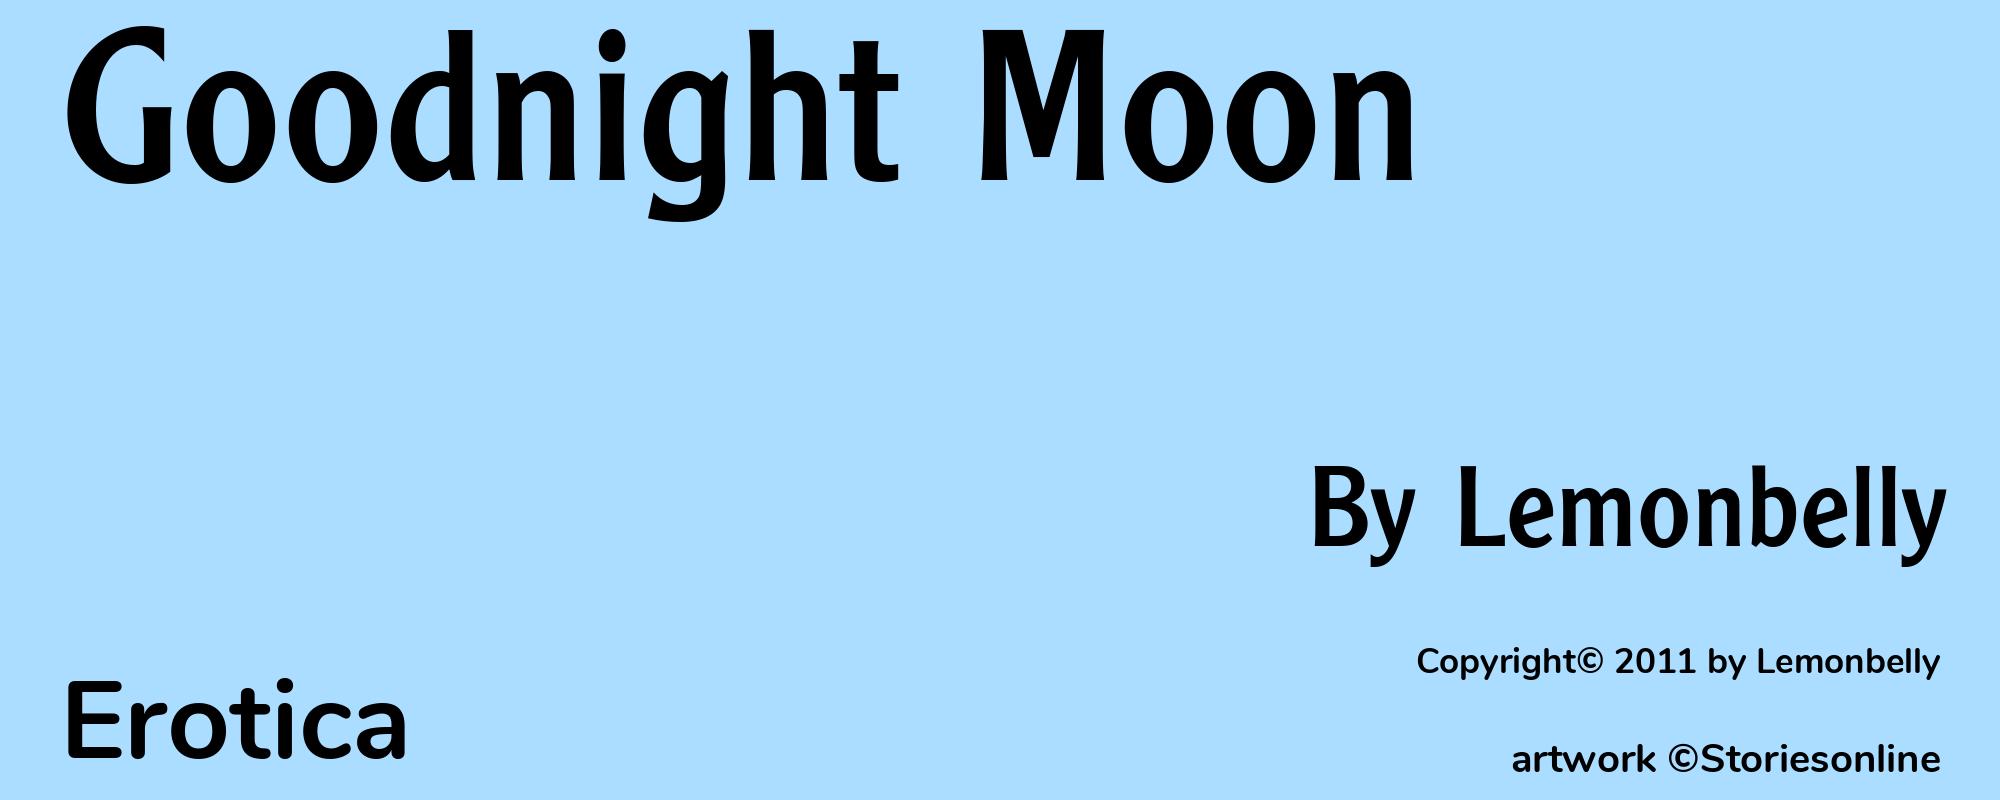 Goodnight Moon - Cover